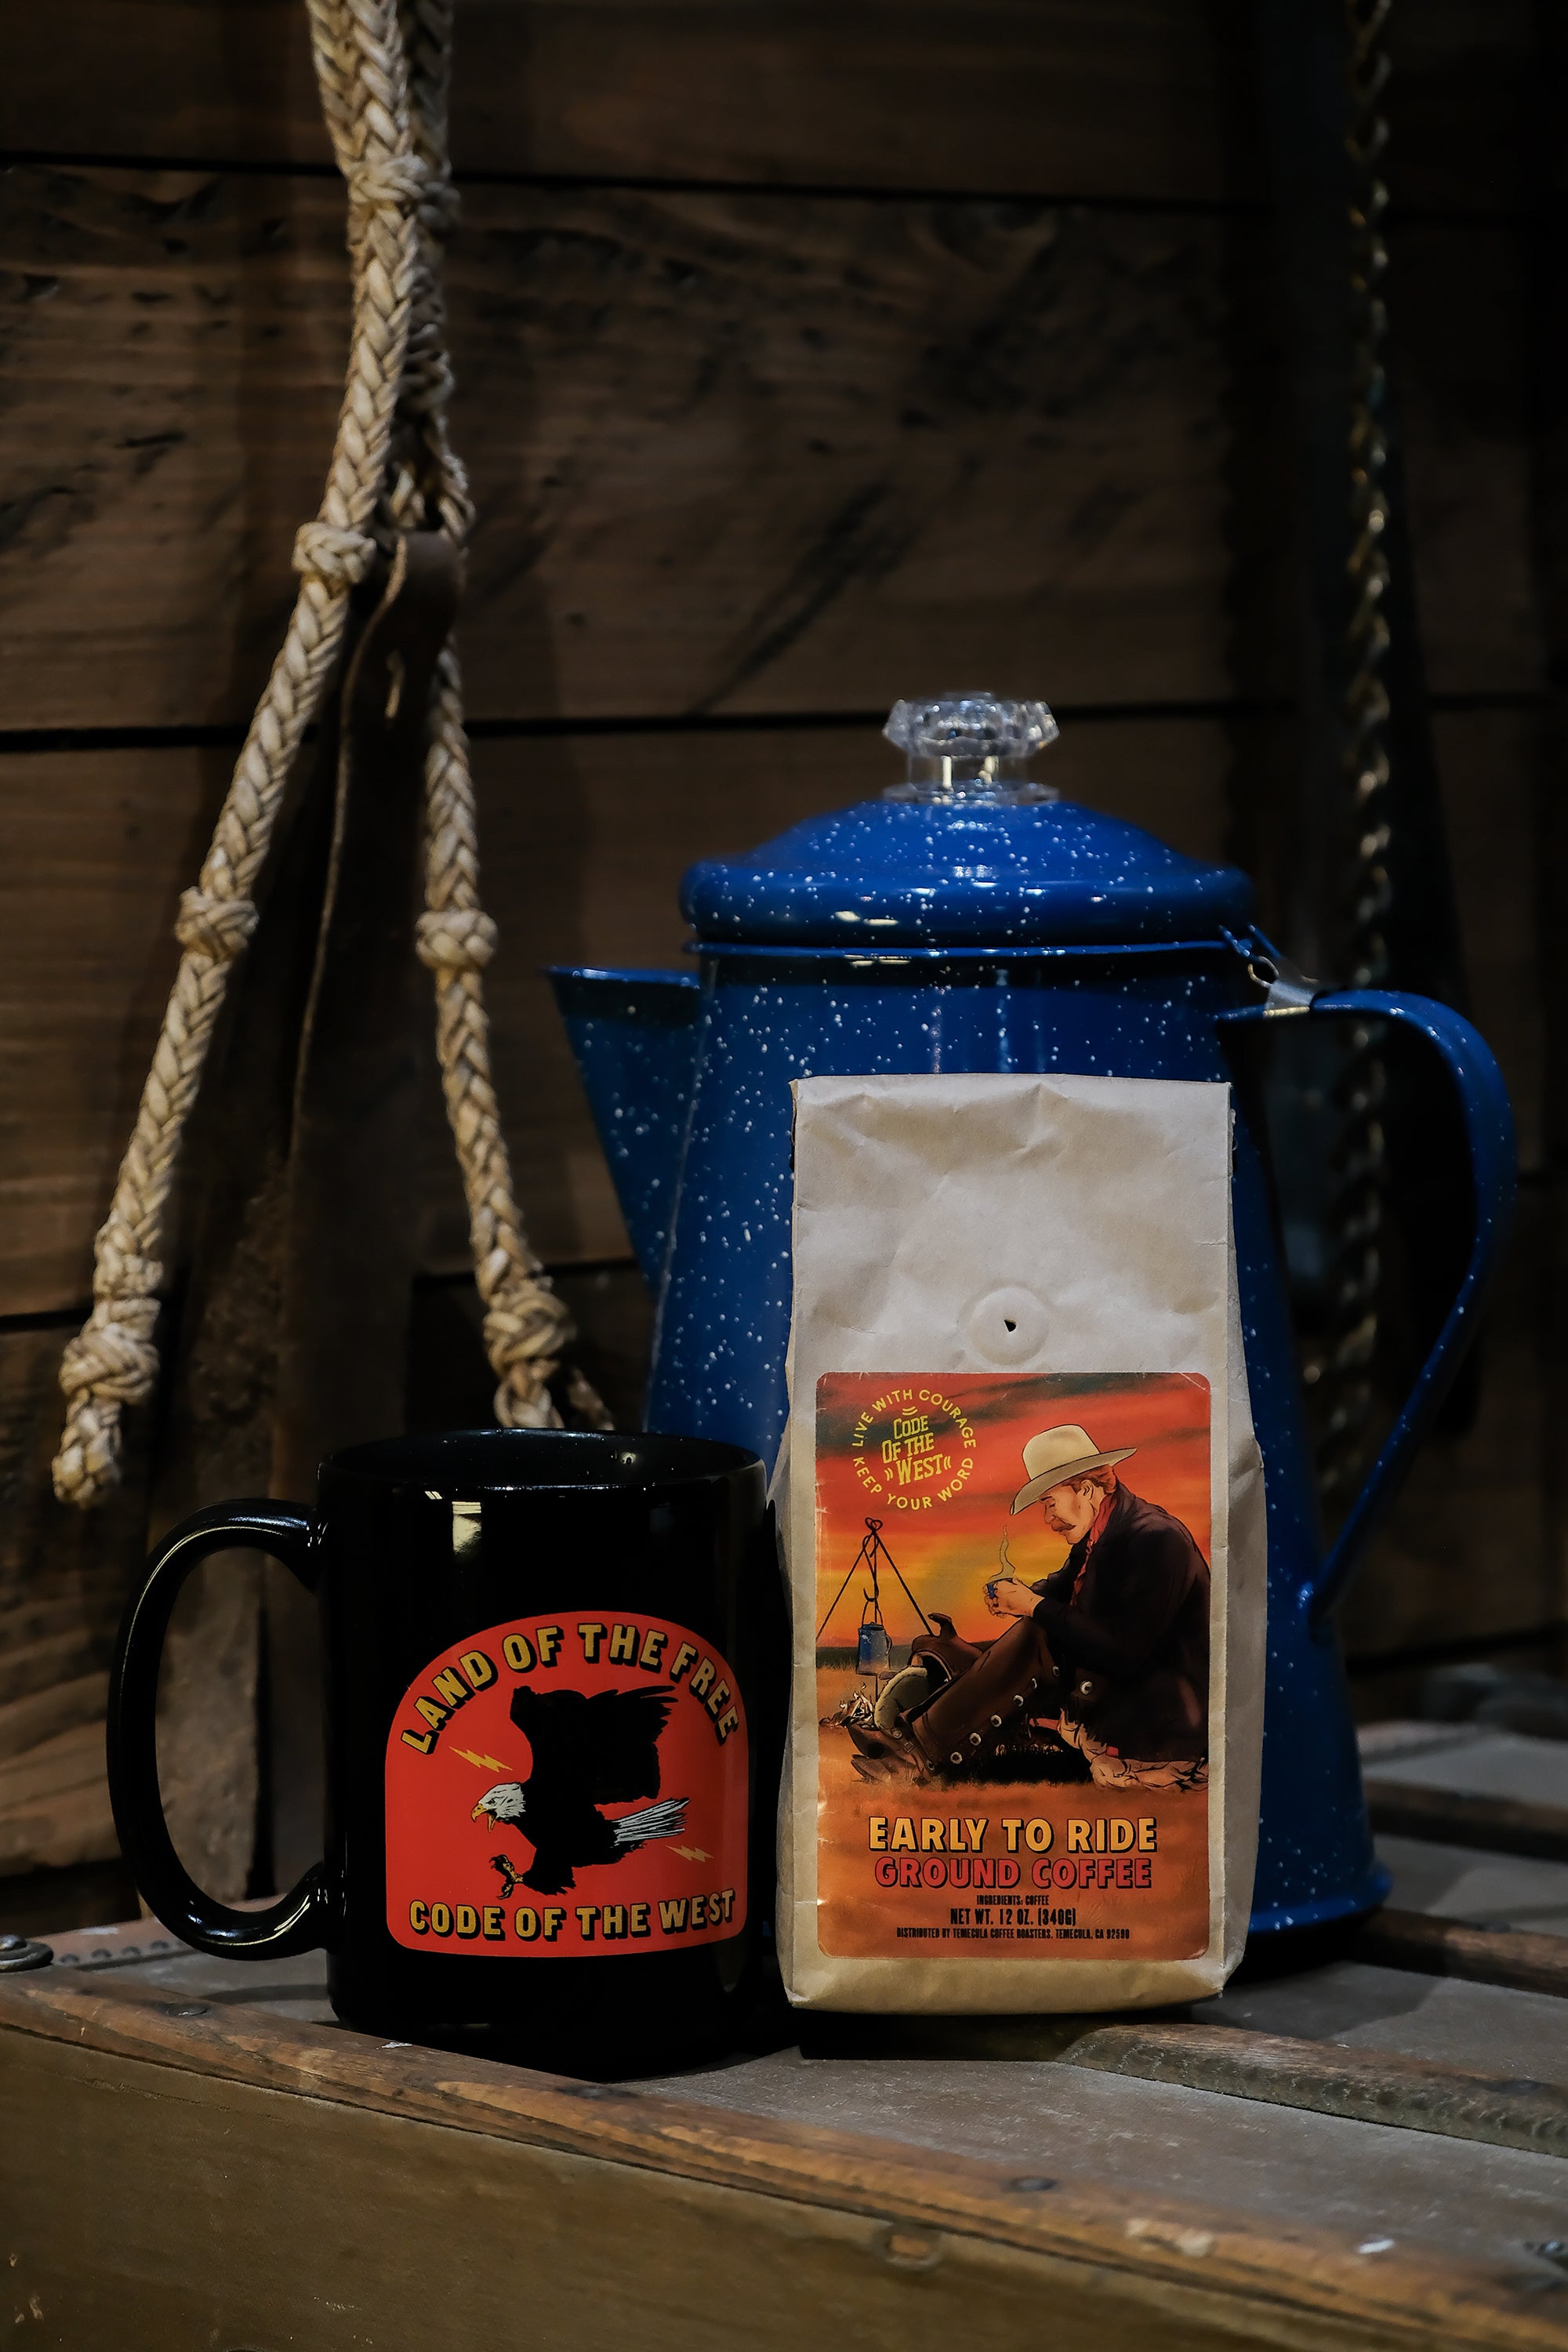 a black mug with a bright red logo showing a bald eagle swooping down with the words Land of The Free and Code of The West, next to an old blue percolator and a bag of code of the west cowboy coffee.